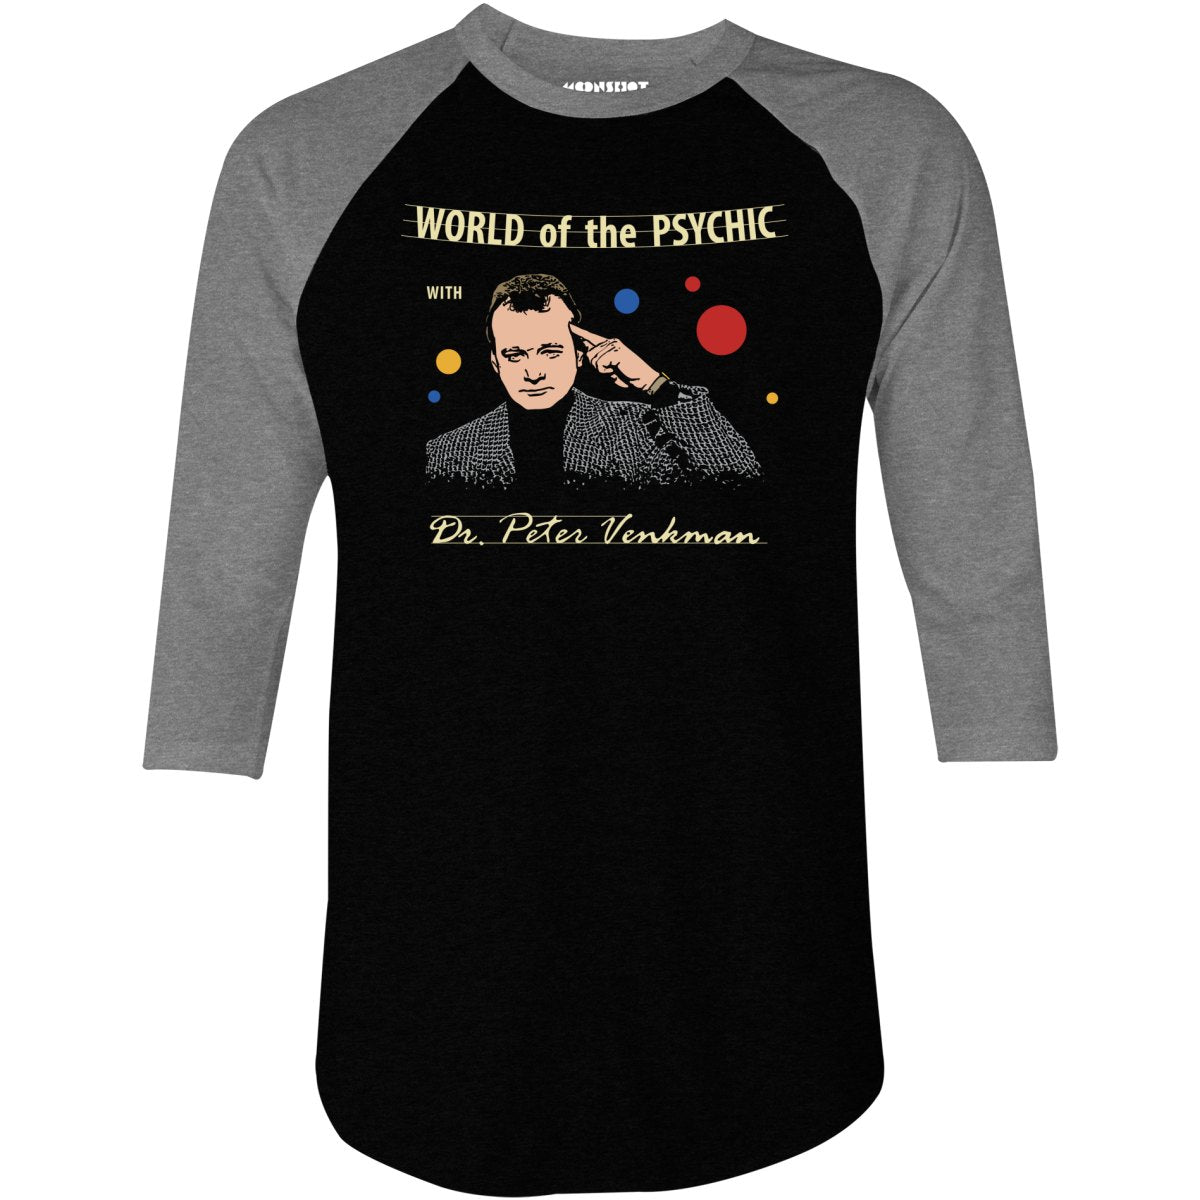 World of the Psychic with Dr. Peter Venkman - 3/4 Sleeve Raglan T-Shirt